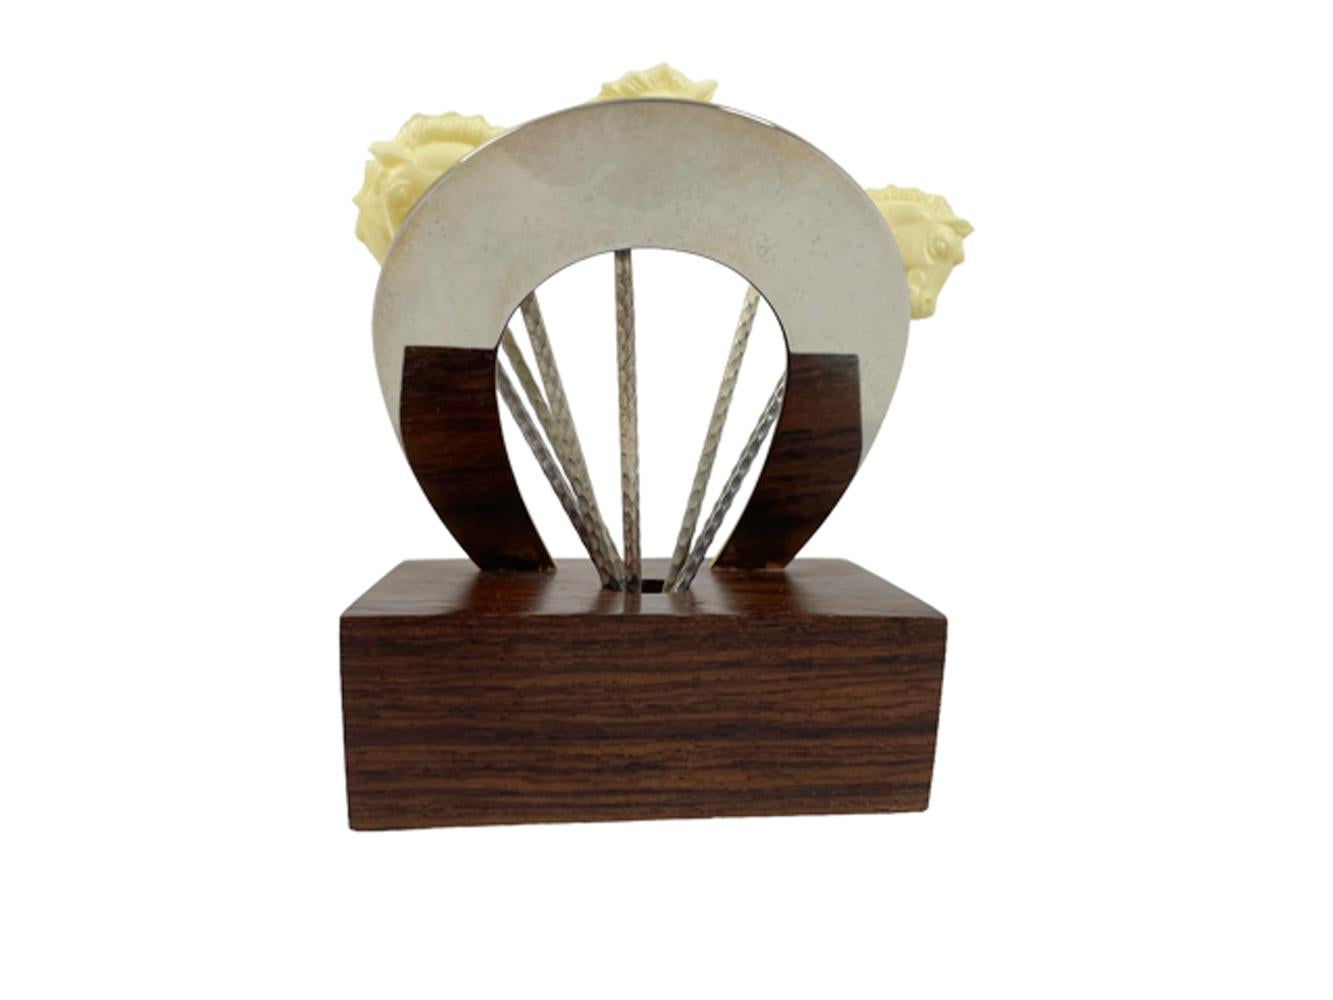 French Art Deco White Bakelite Horse Head Topped Cocktail Picks with Horseshoe Stand For Sale